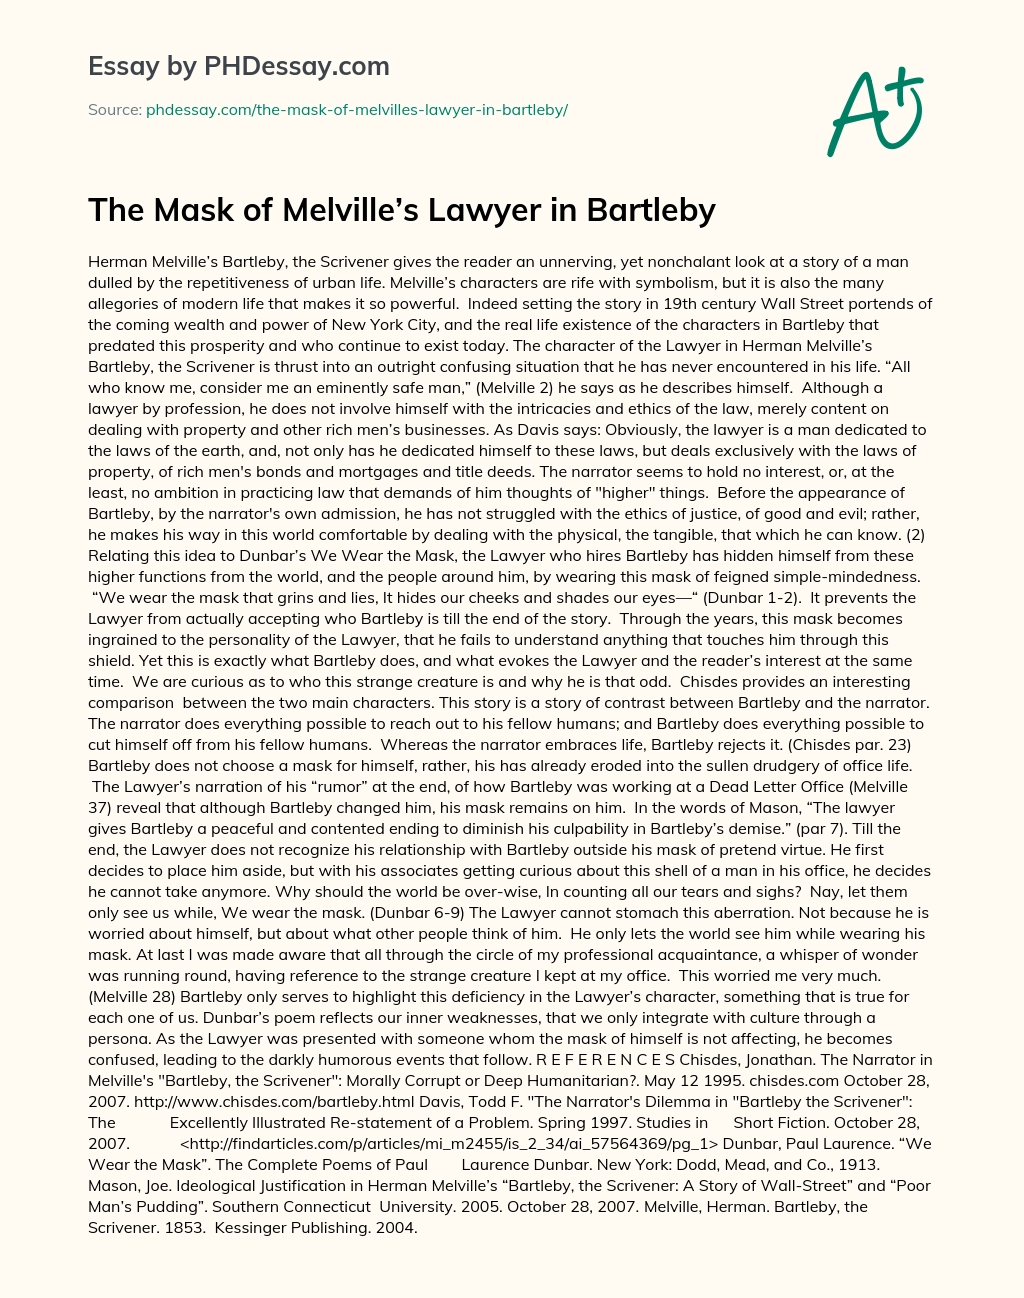 The Mask of Melville’s Lawyer in Bartleby essay